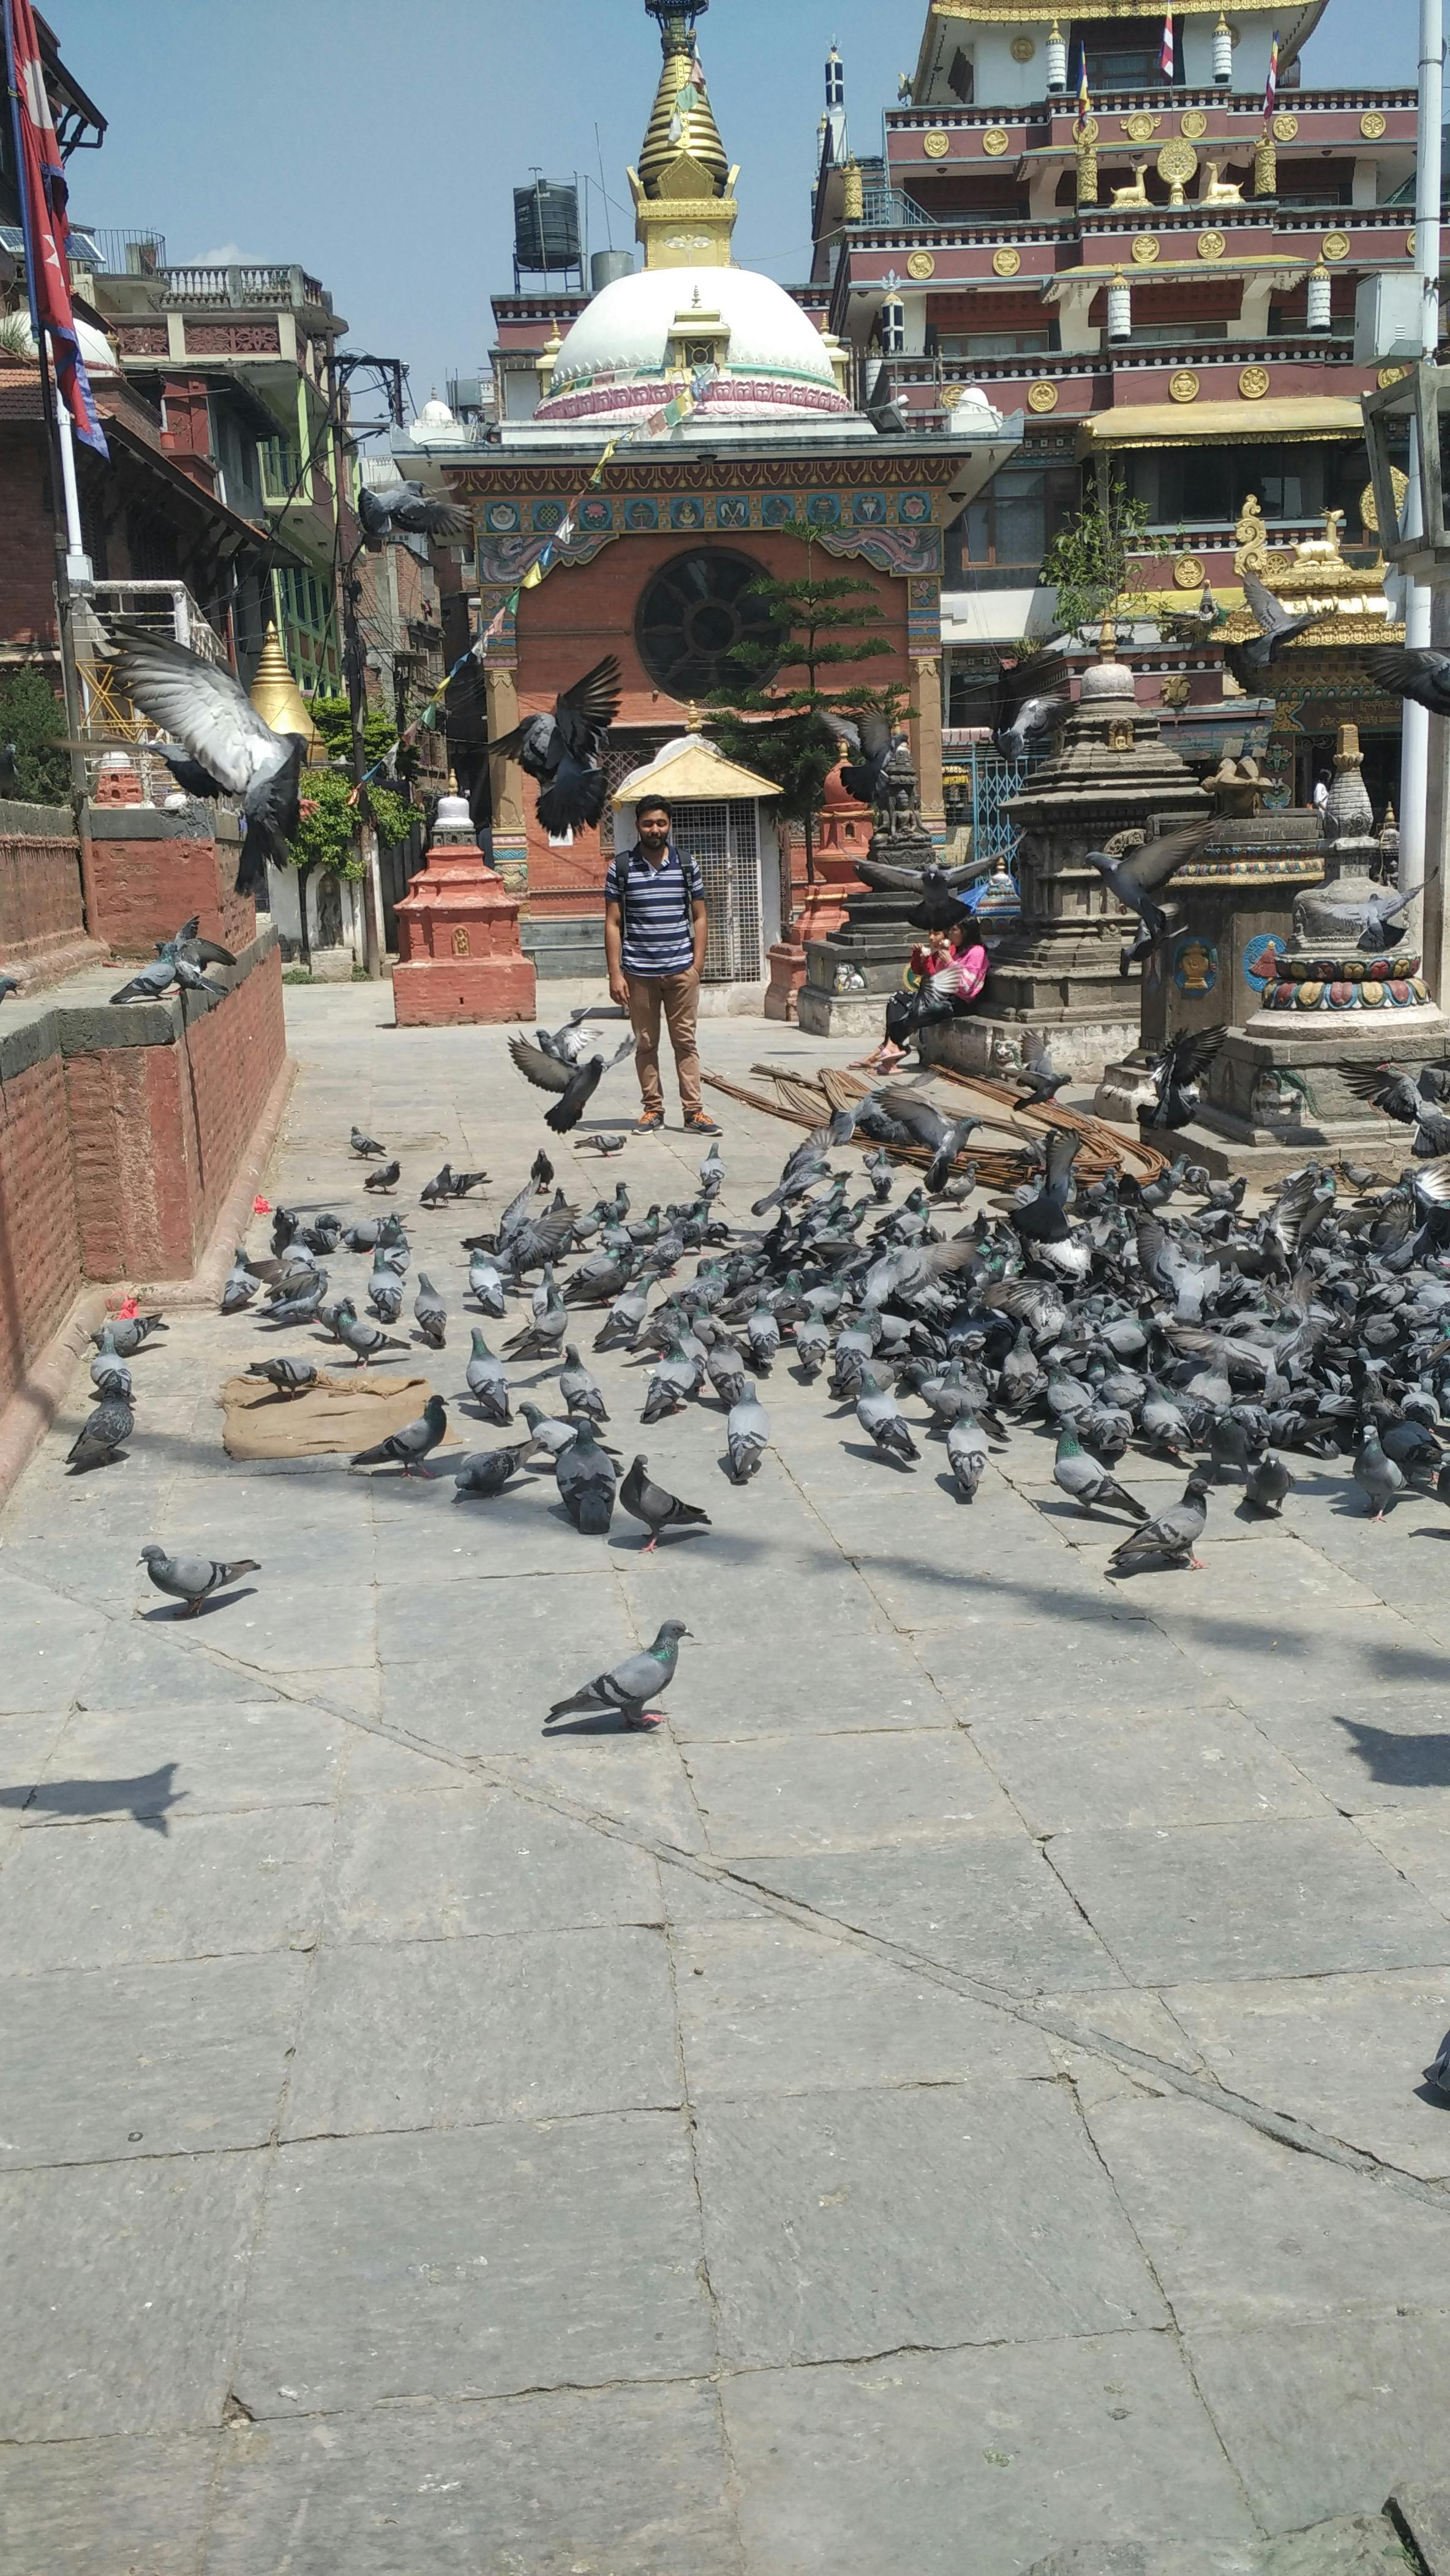 Free stock photo of Surrounded with pigeons